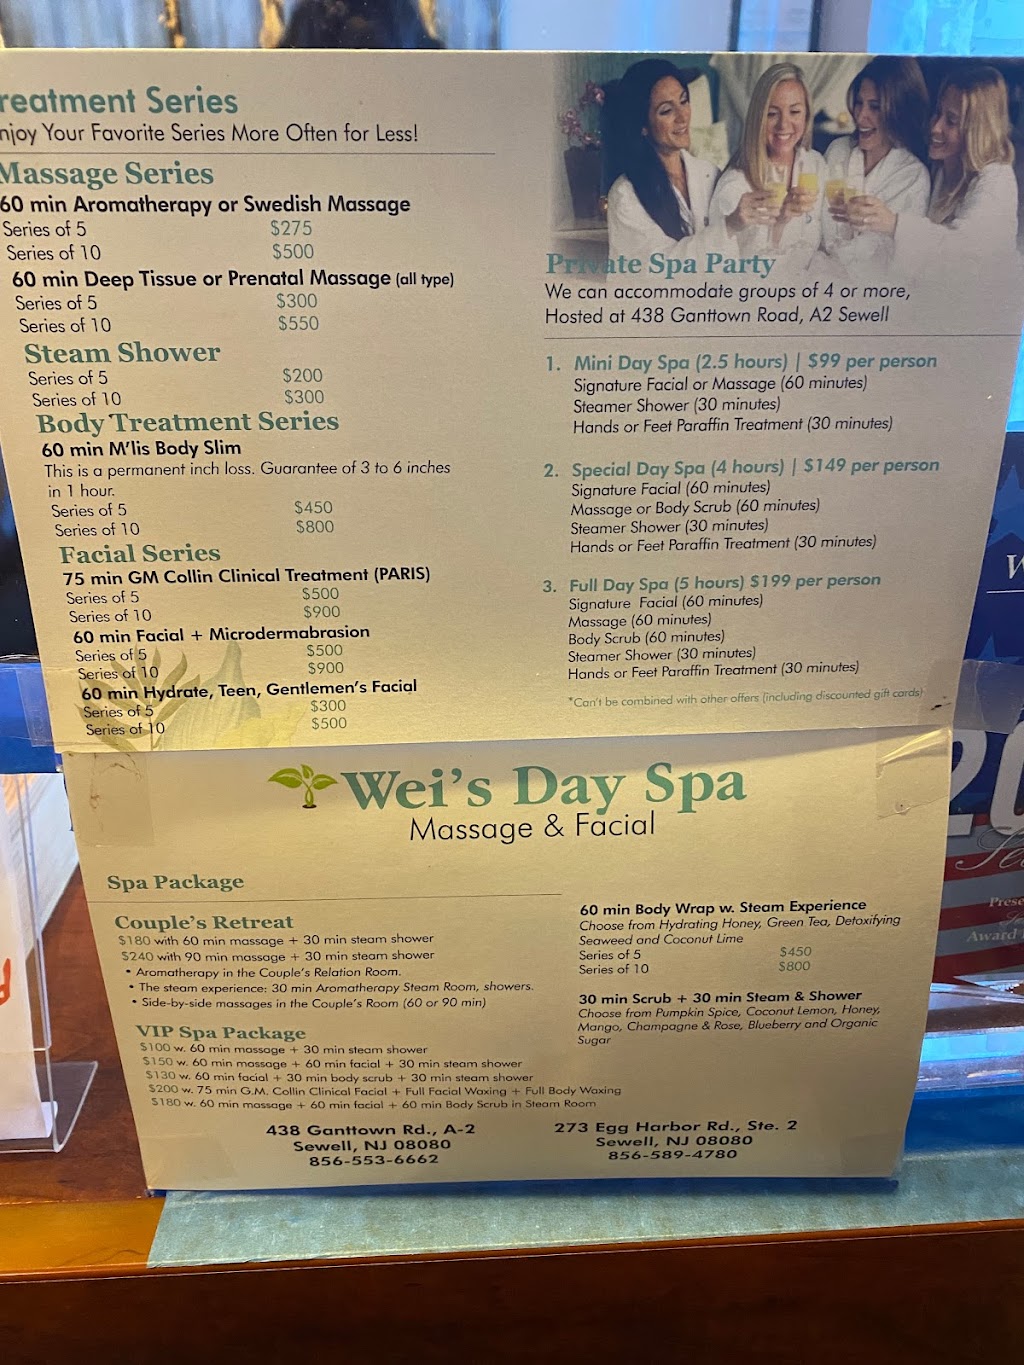 Wei’s Day Spa | 273 Egg Harbor Rd # 2, Sewell, NJ 08080 | Phone: (856) 589-4780